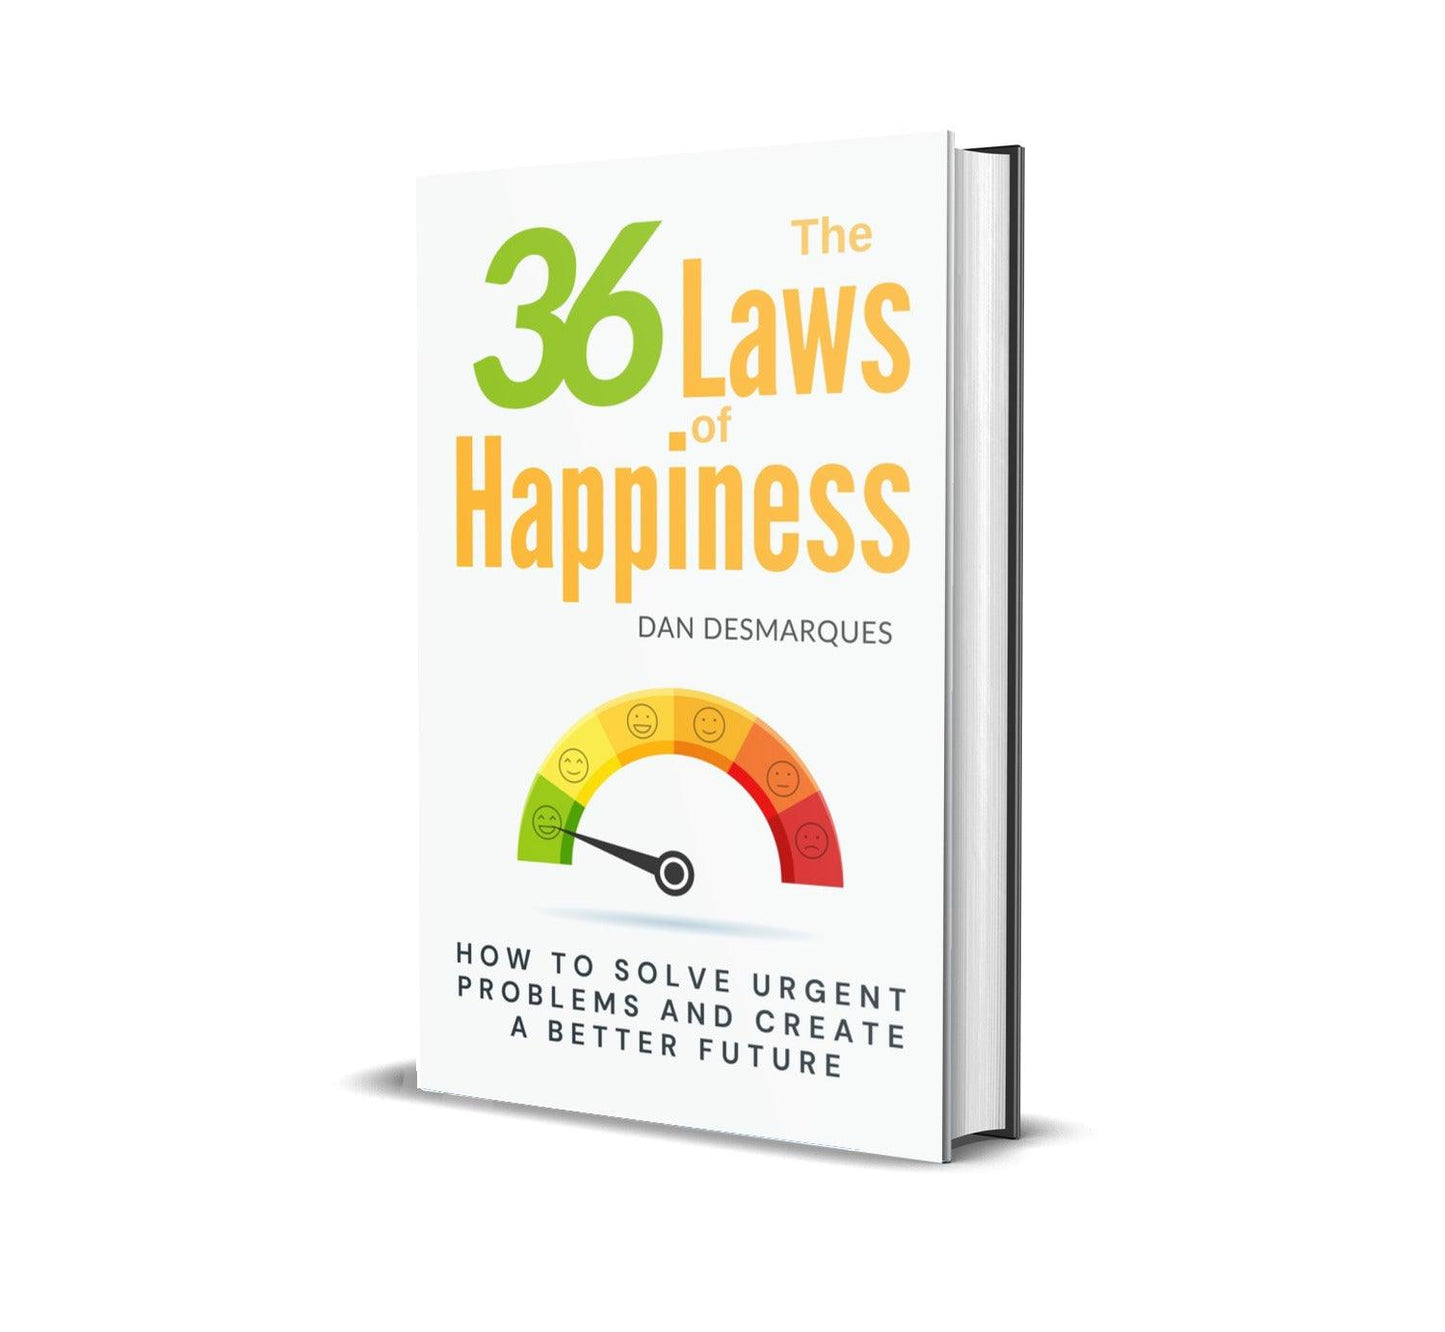 The 36 Laws of Happiness - 22 Lions